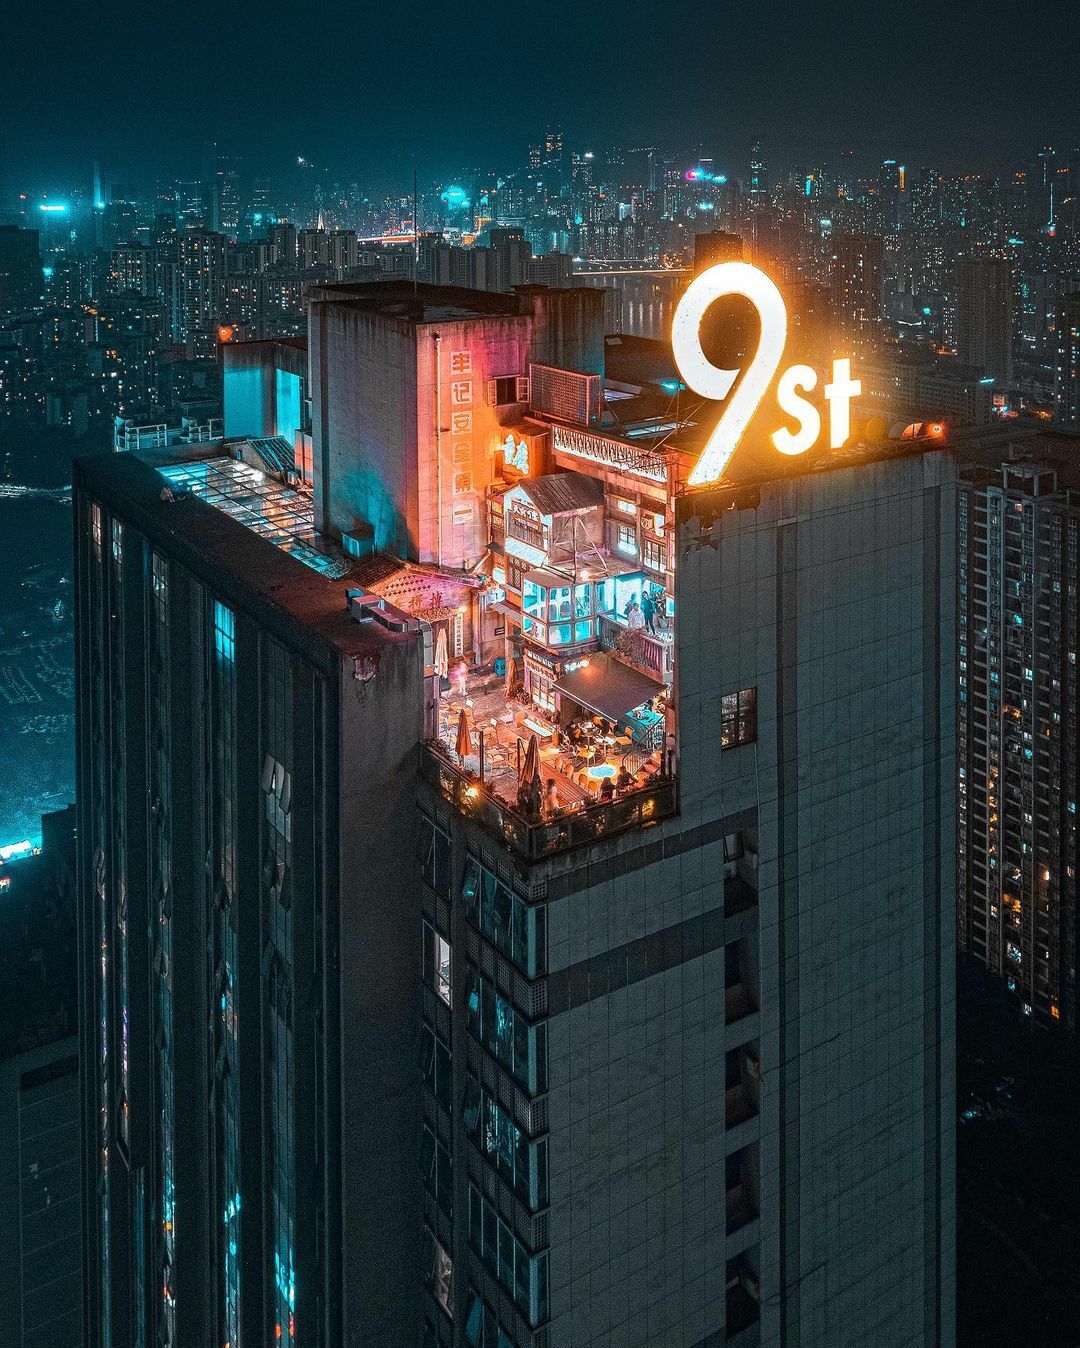 A Rooftop Restaurant/Café In Chongqing, China